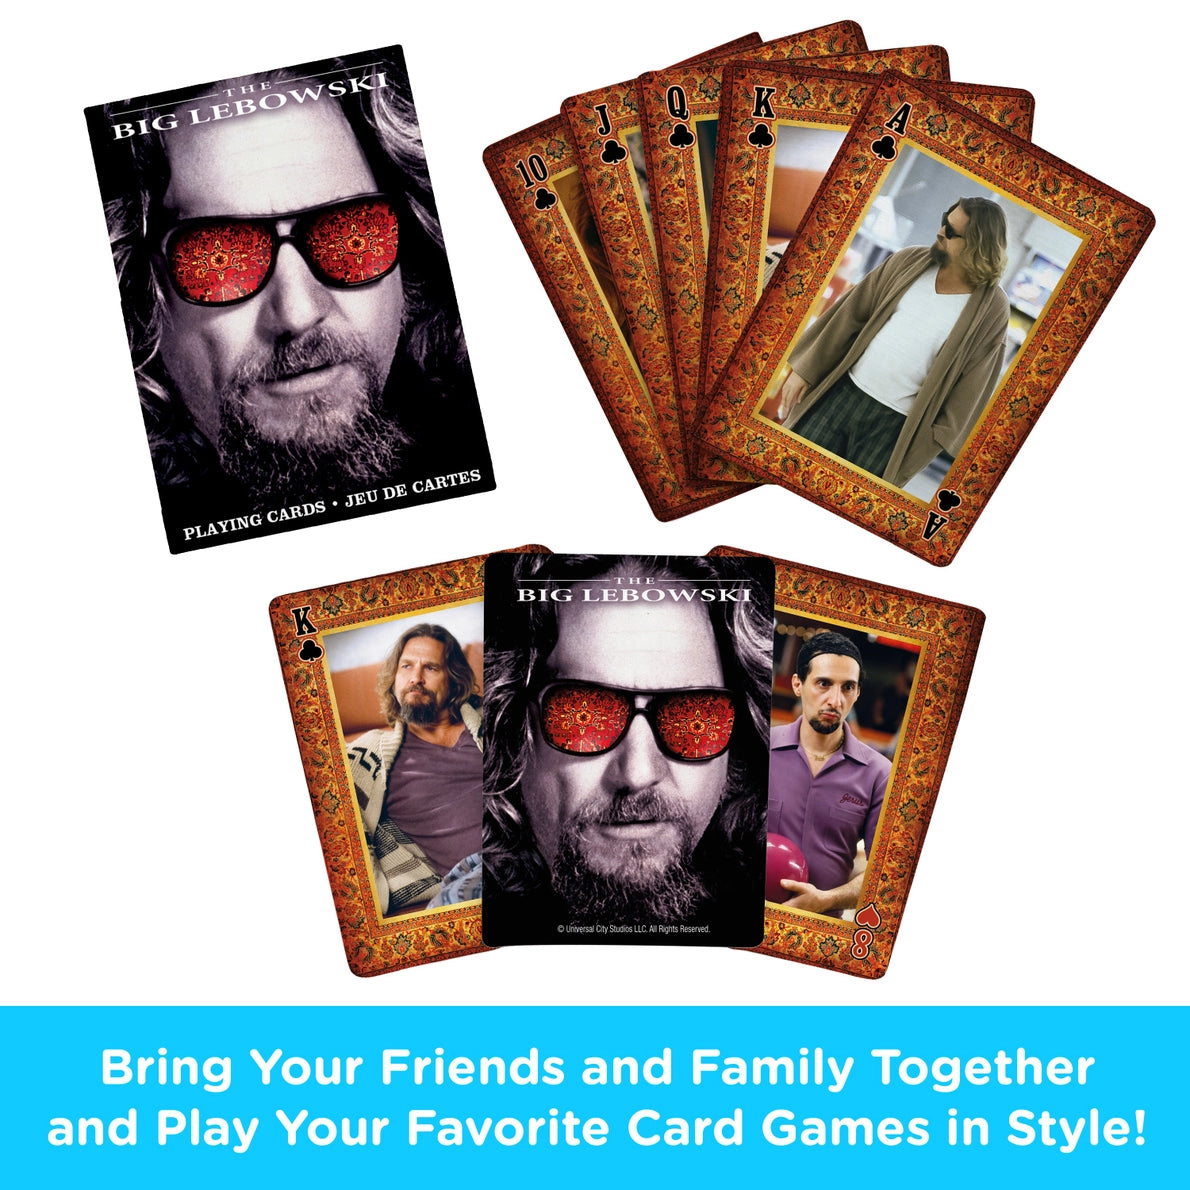 The Big Lebowski Playing Cards by Aquarius - Ties the Game Room Together